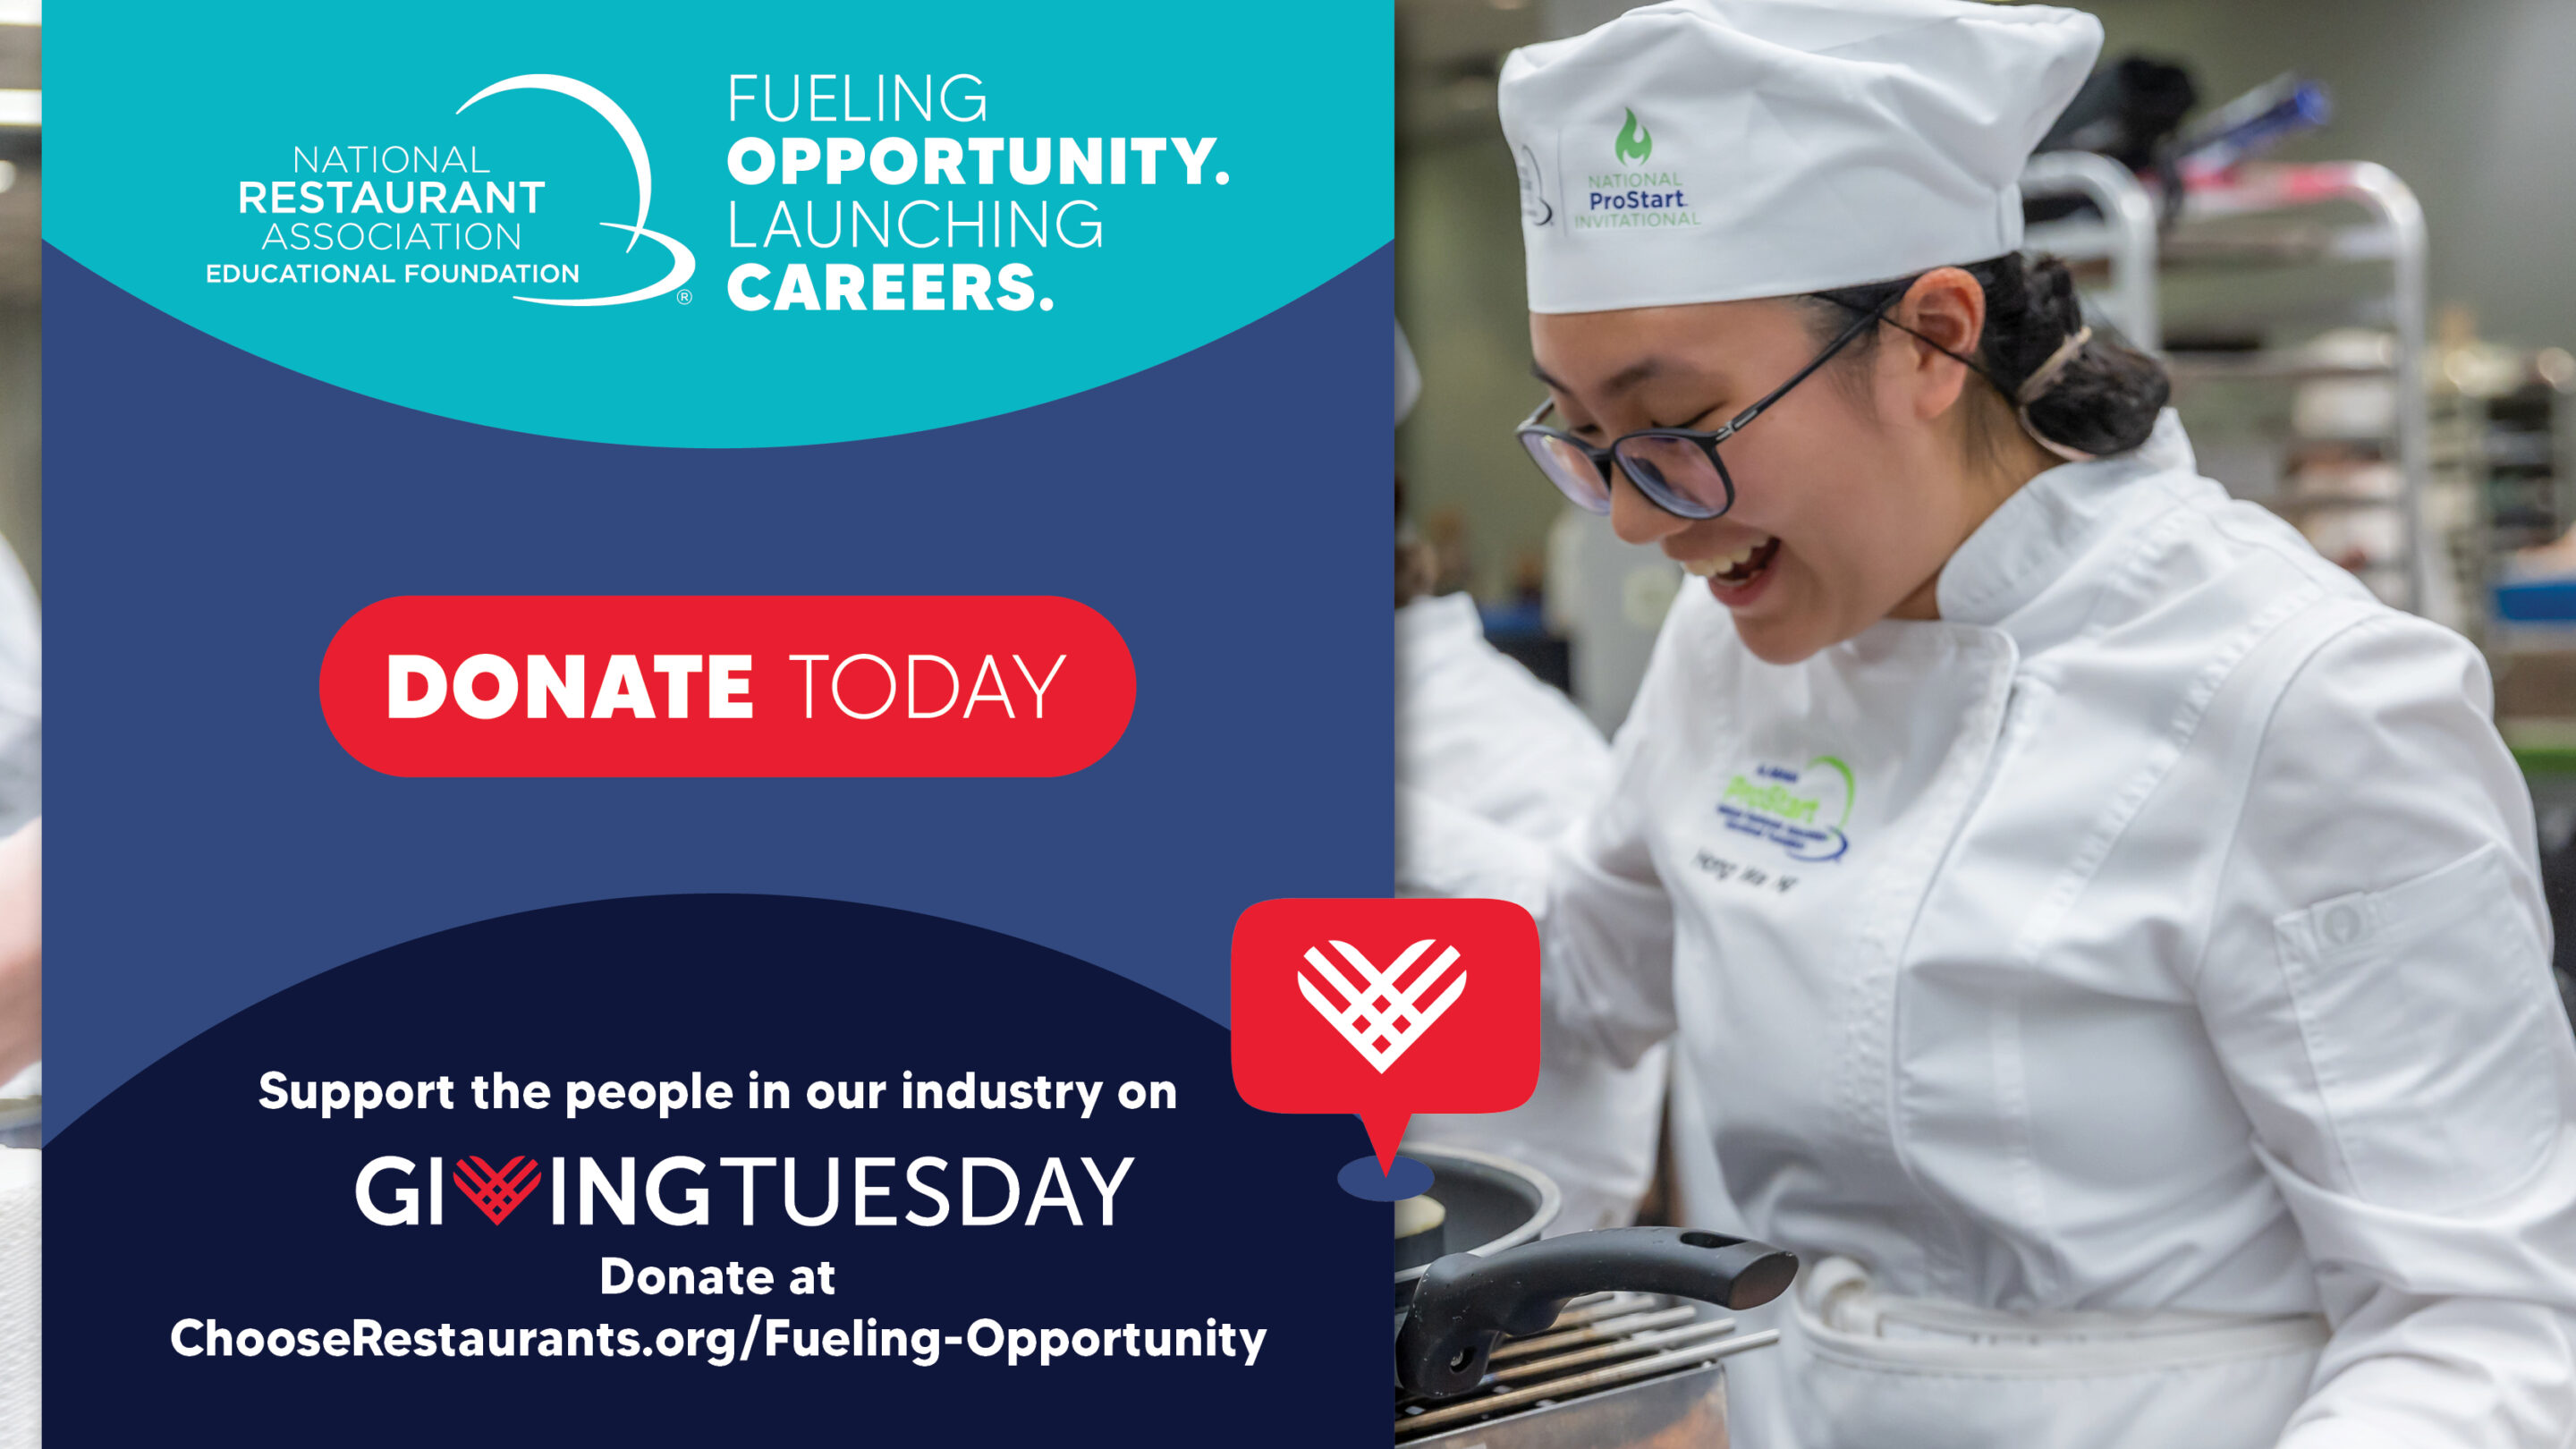 NRAEF Logo. Fueling opportunity. Launching careers. Donate Today button. Giving Tuesday. Photo of ProStart student in chef's uniform.